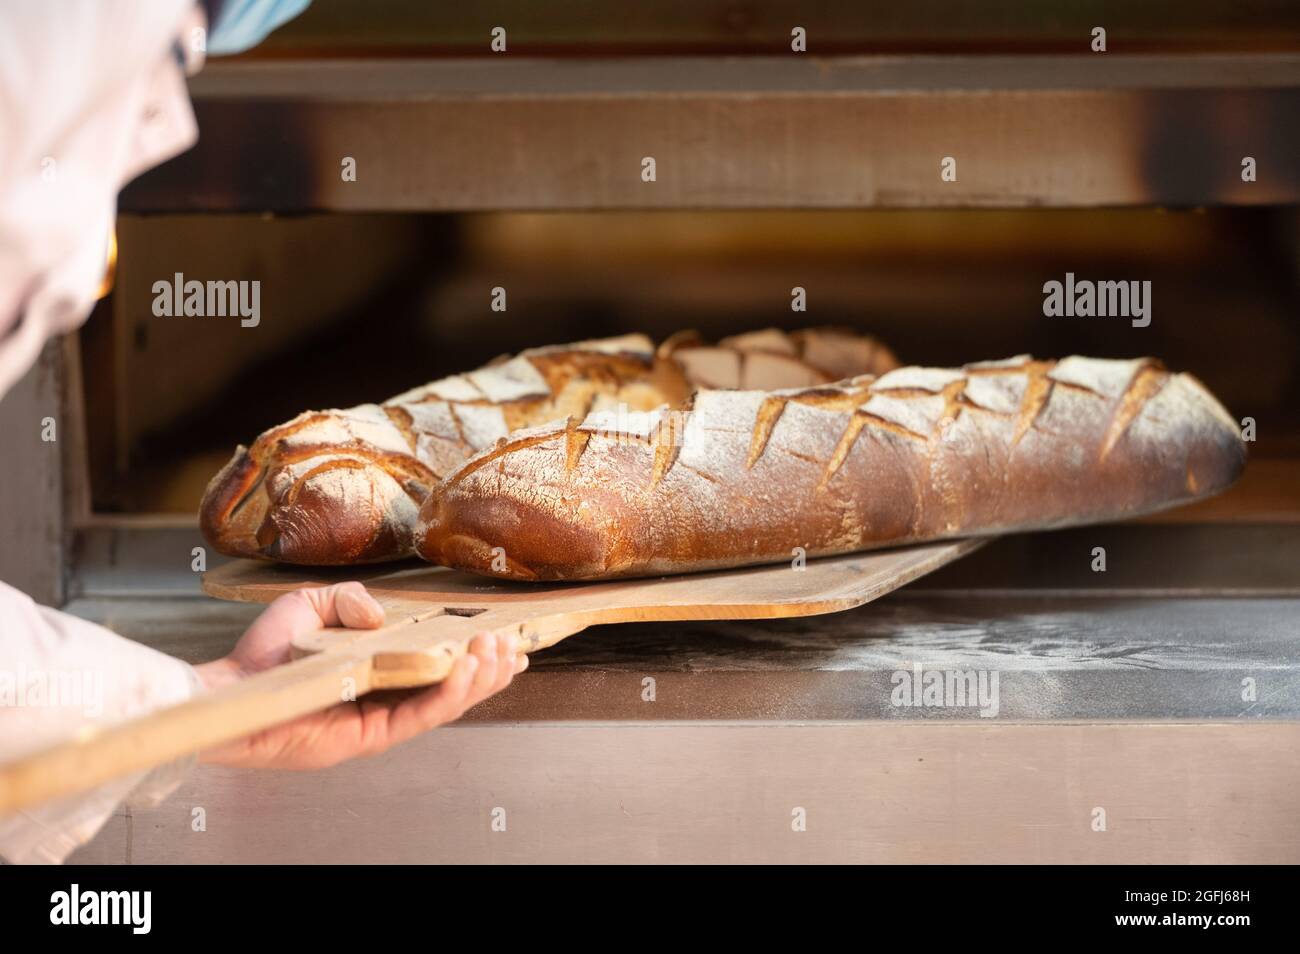 Super U supermarket : someone making bread Baker taking farmhouse bread out of the oven Stock Photo